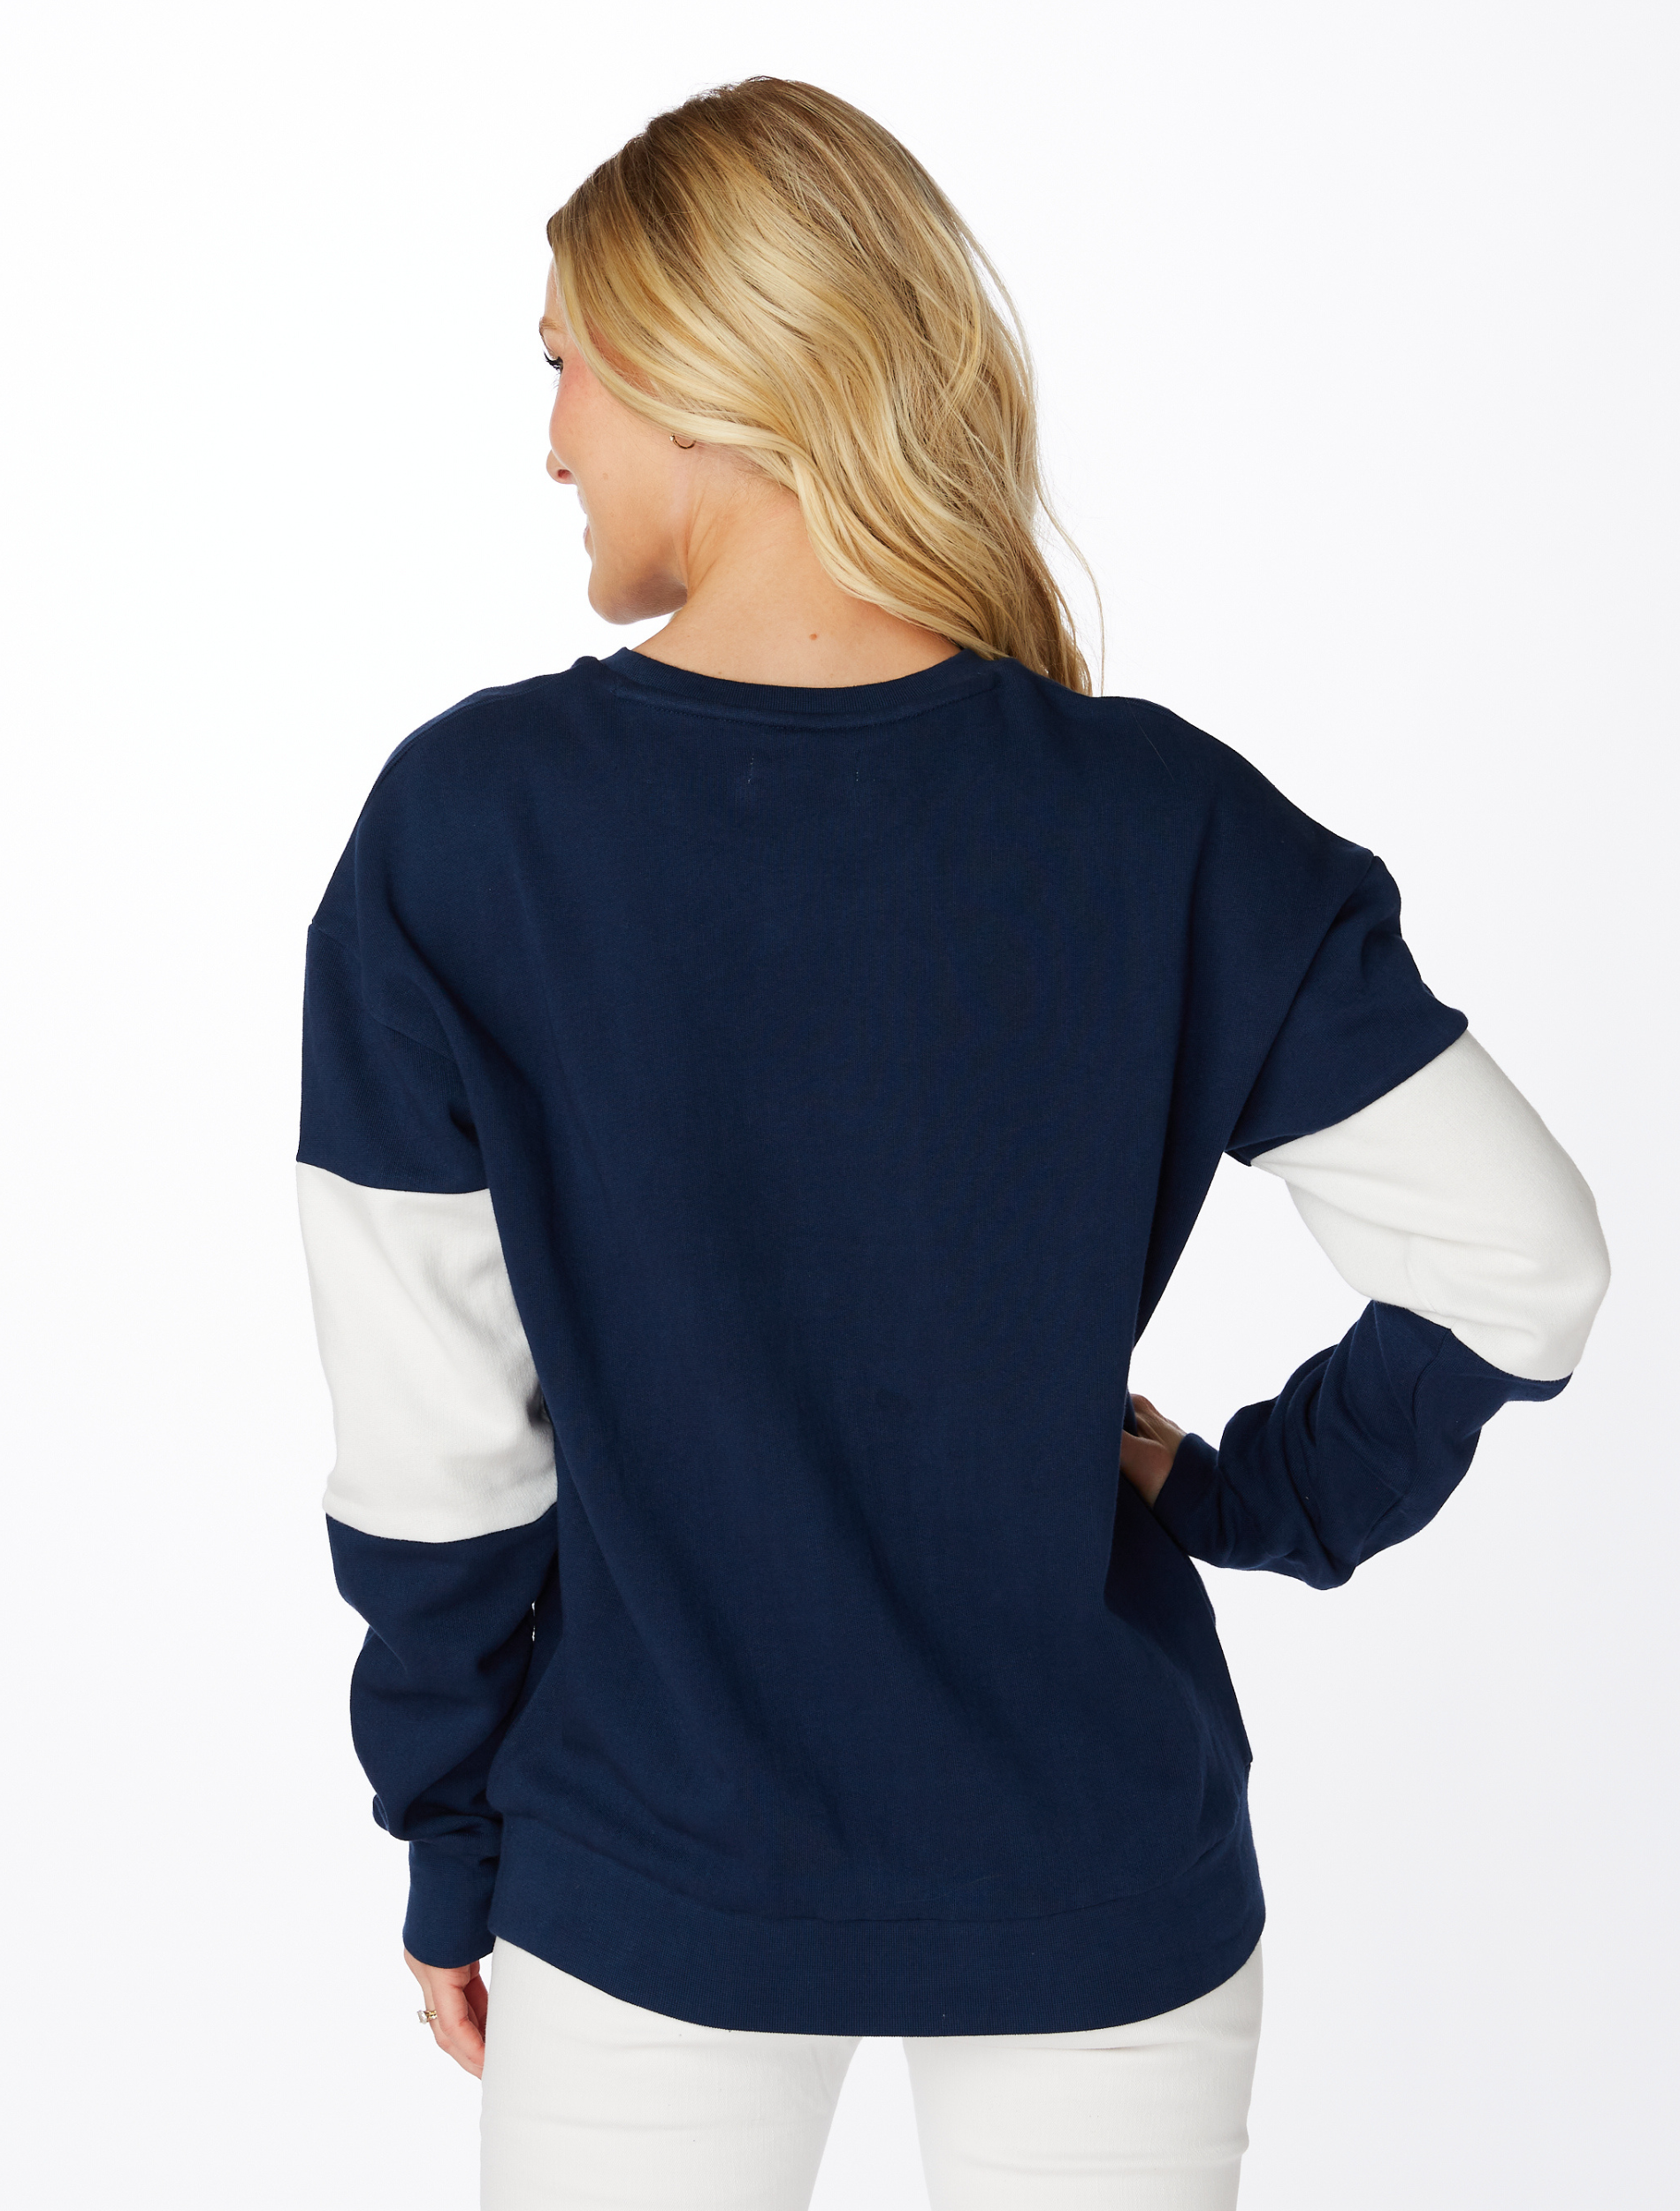 The Auburn Southlawn Comfy Cord Pullover  Trendy clothes for women,  Sweater dress oversized, Auburn sweatshirt